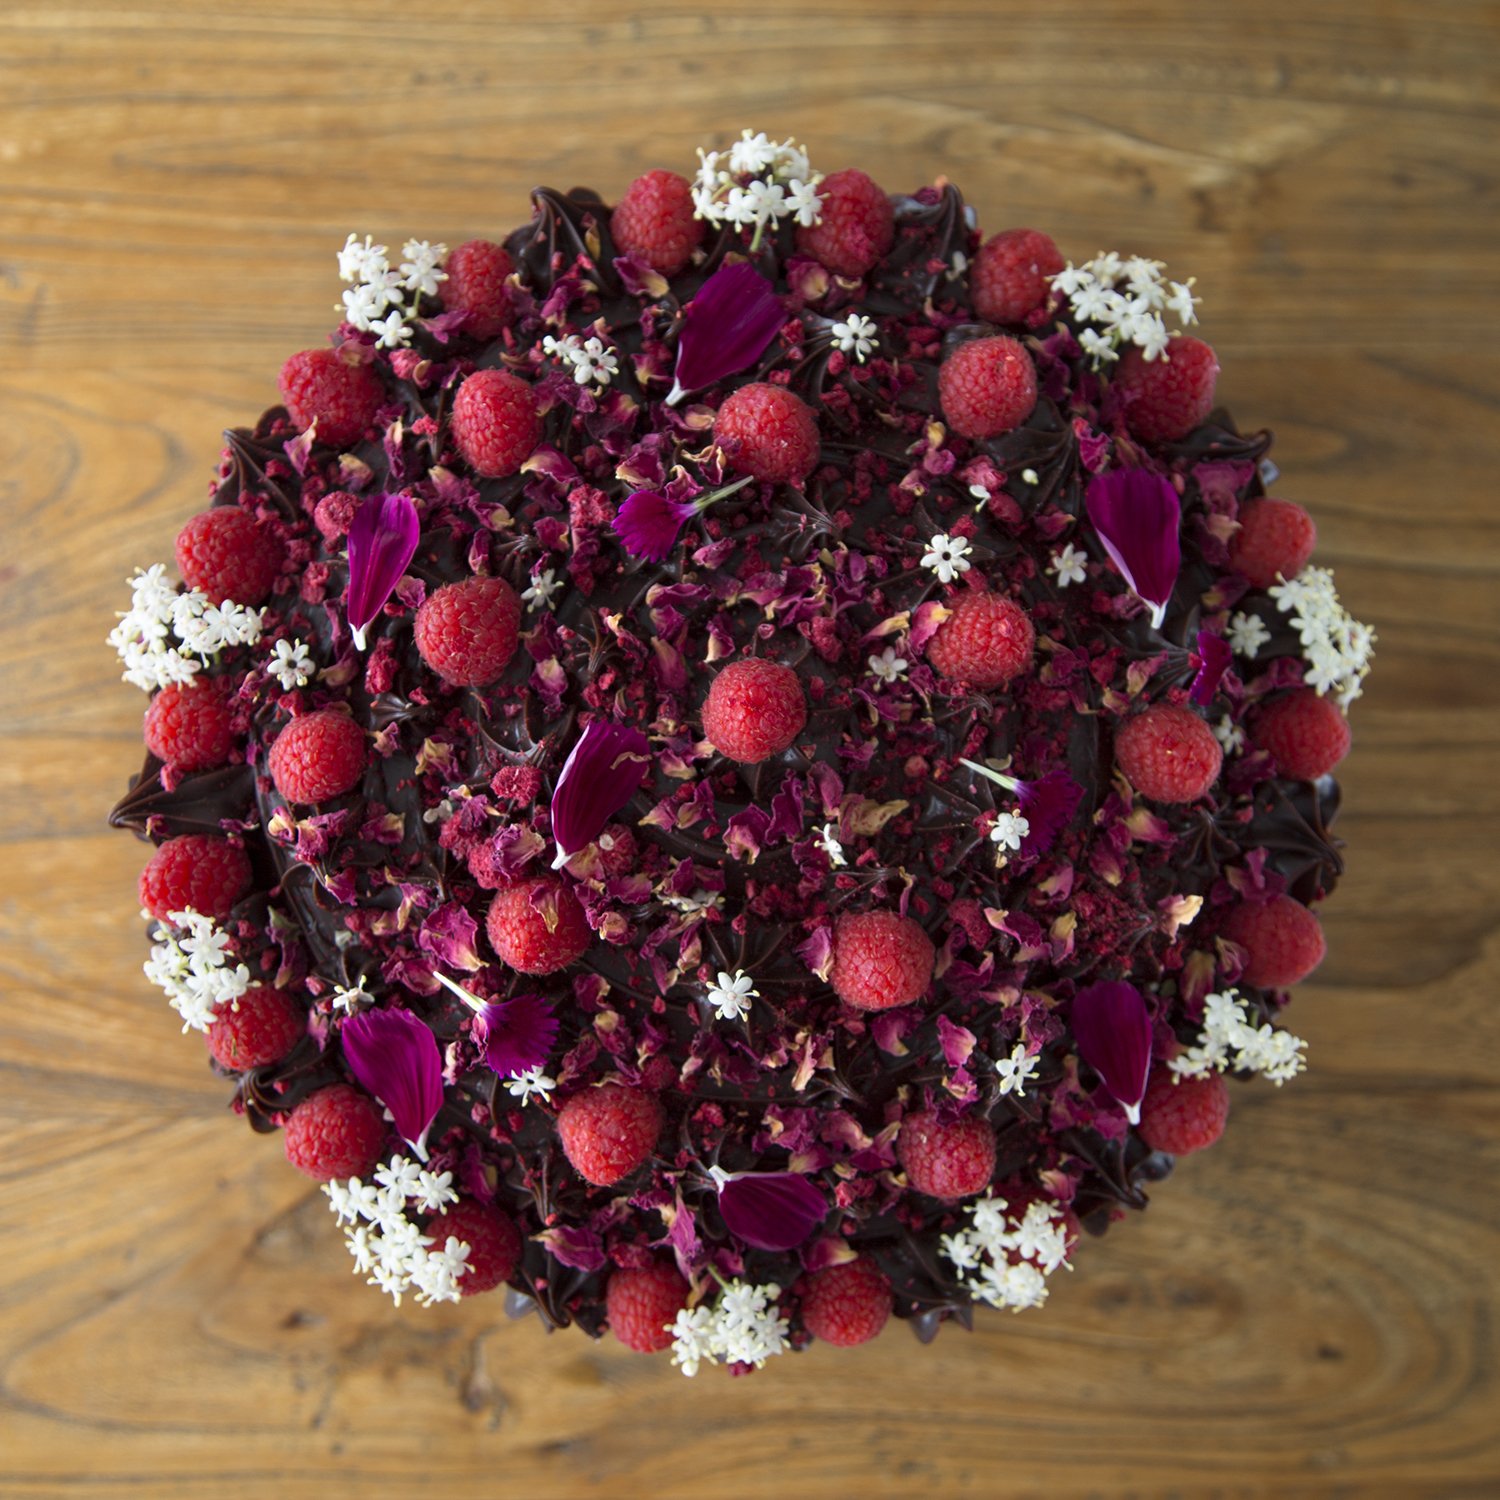 CHOCOLATE, ROSE AND BERRY CAKE